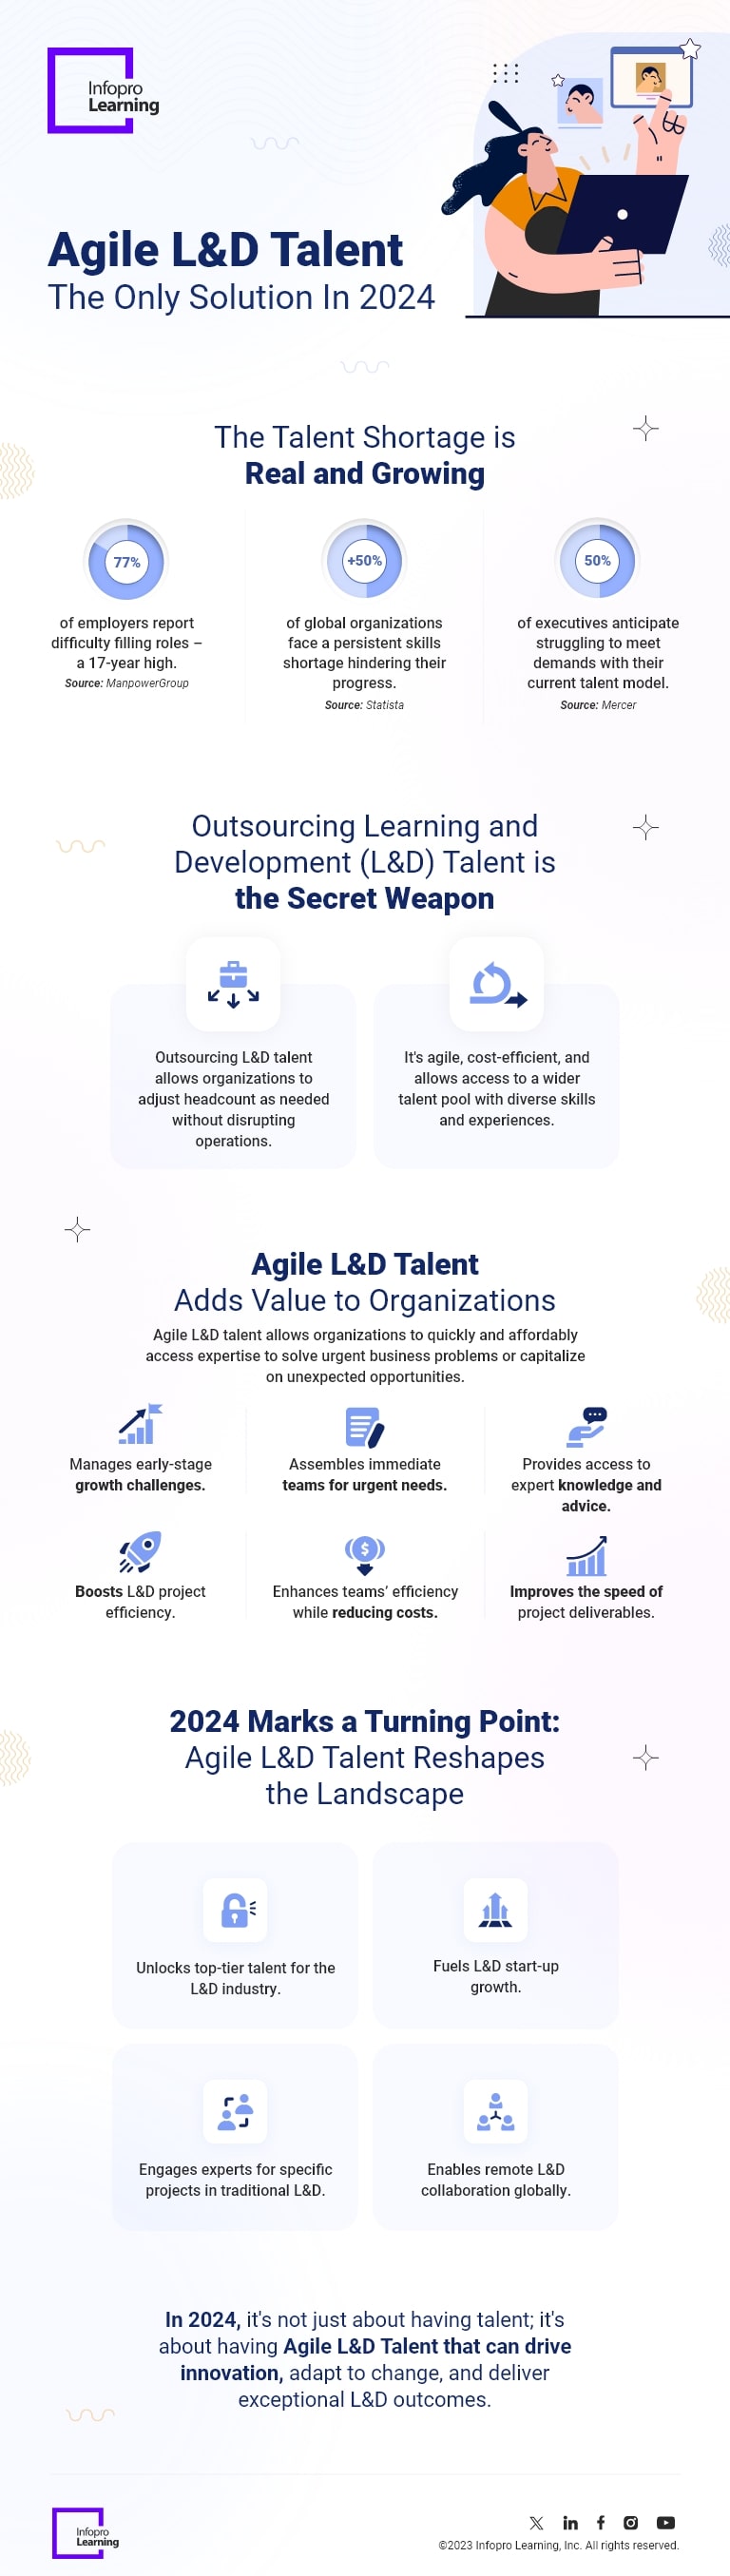 Agile-LD-Talent-The-Only-Solution-In-2024